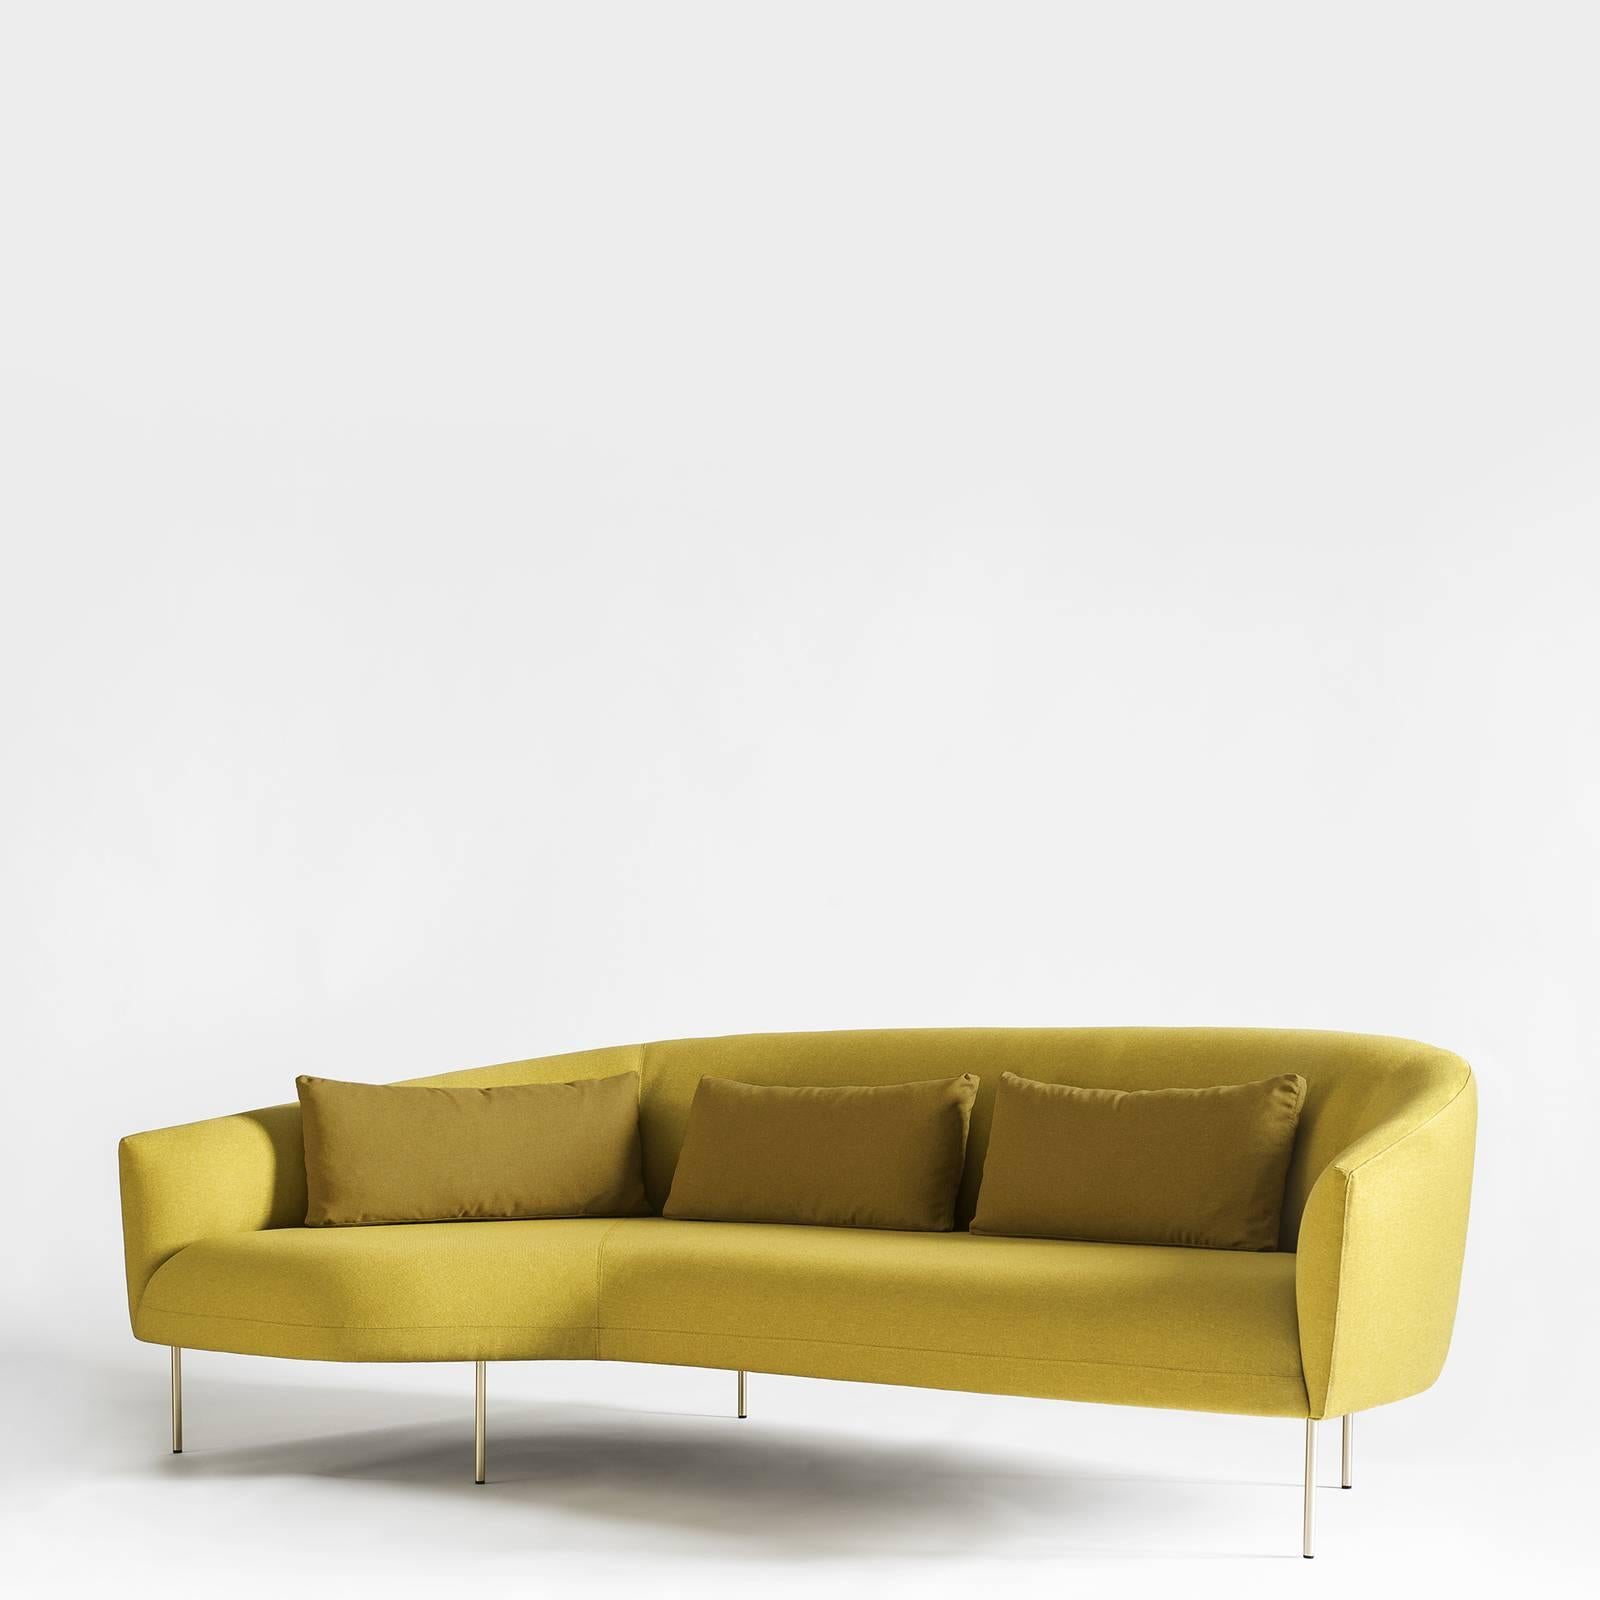 Designed by Jonas Wagell, this sofa is a jewel of contemporary decor and will enliven a modern living room, providing comfortable seating and a sophisticated accent. The curved silhouette of its cushions, upholstered with a bright yellow fabric,